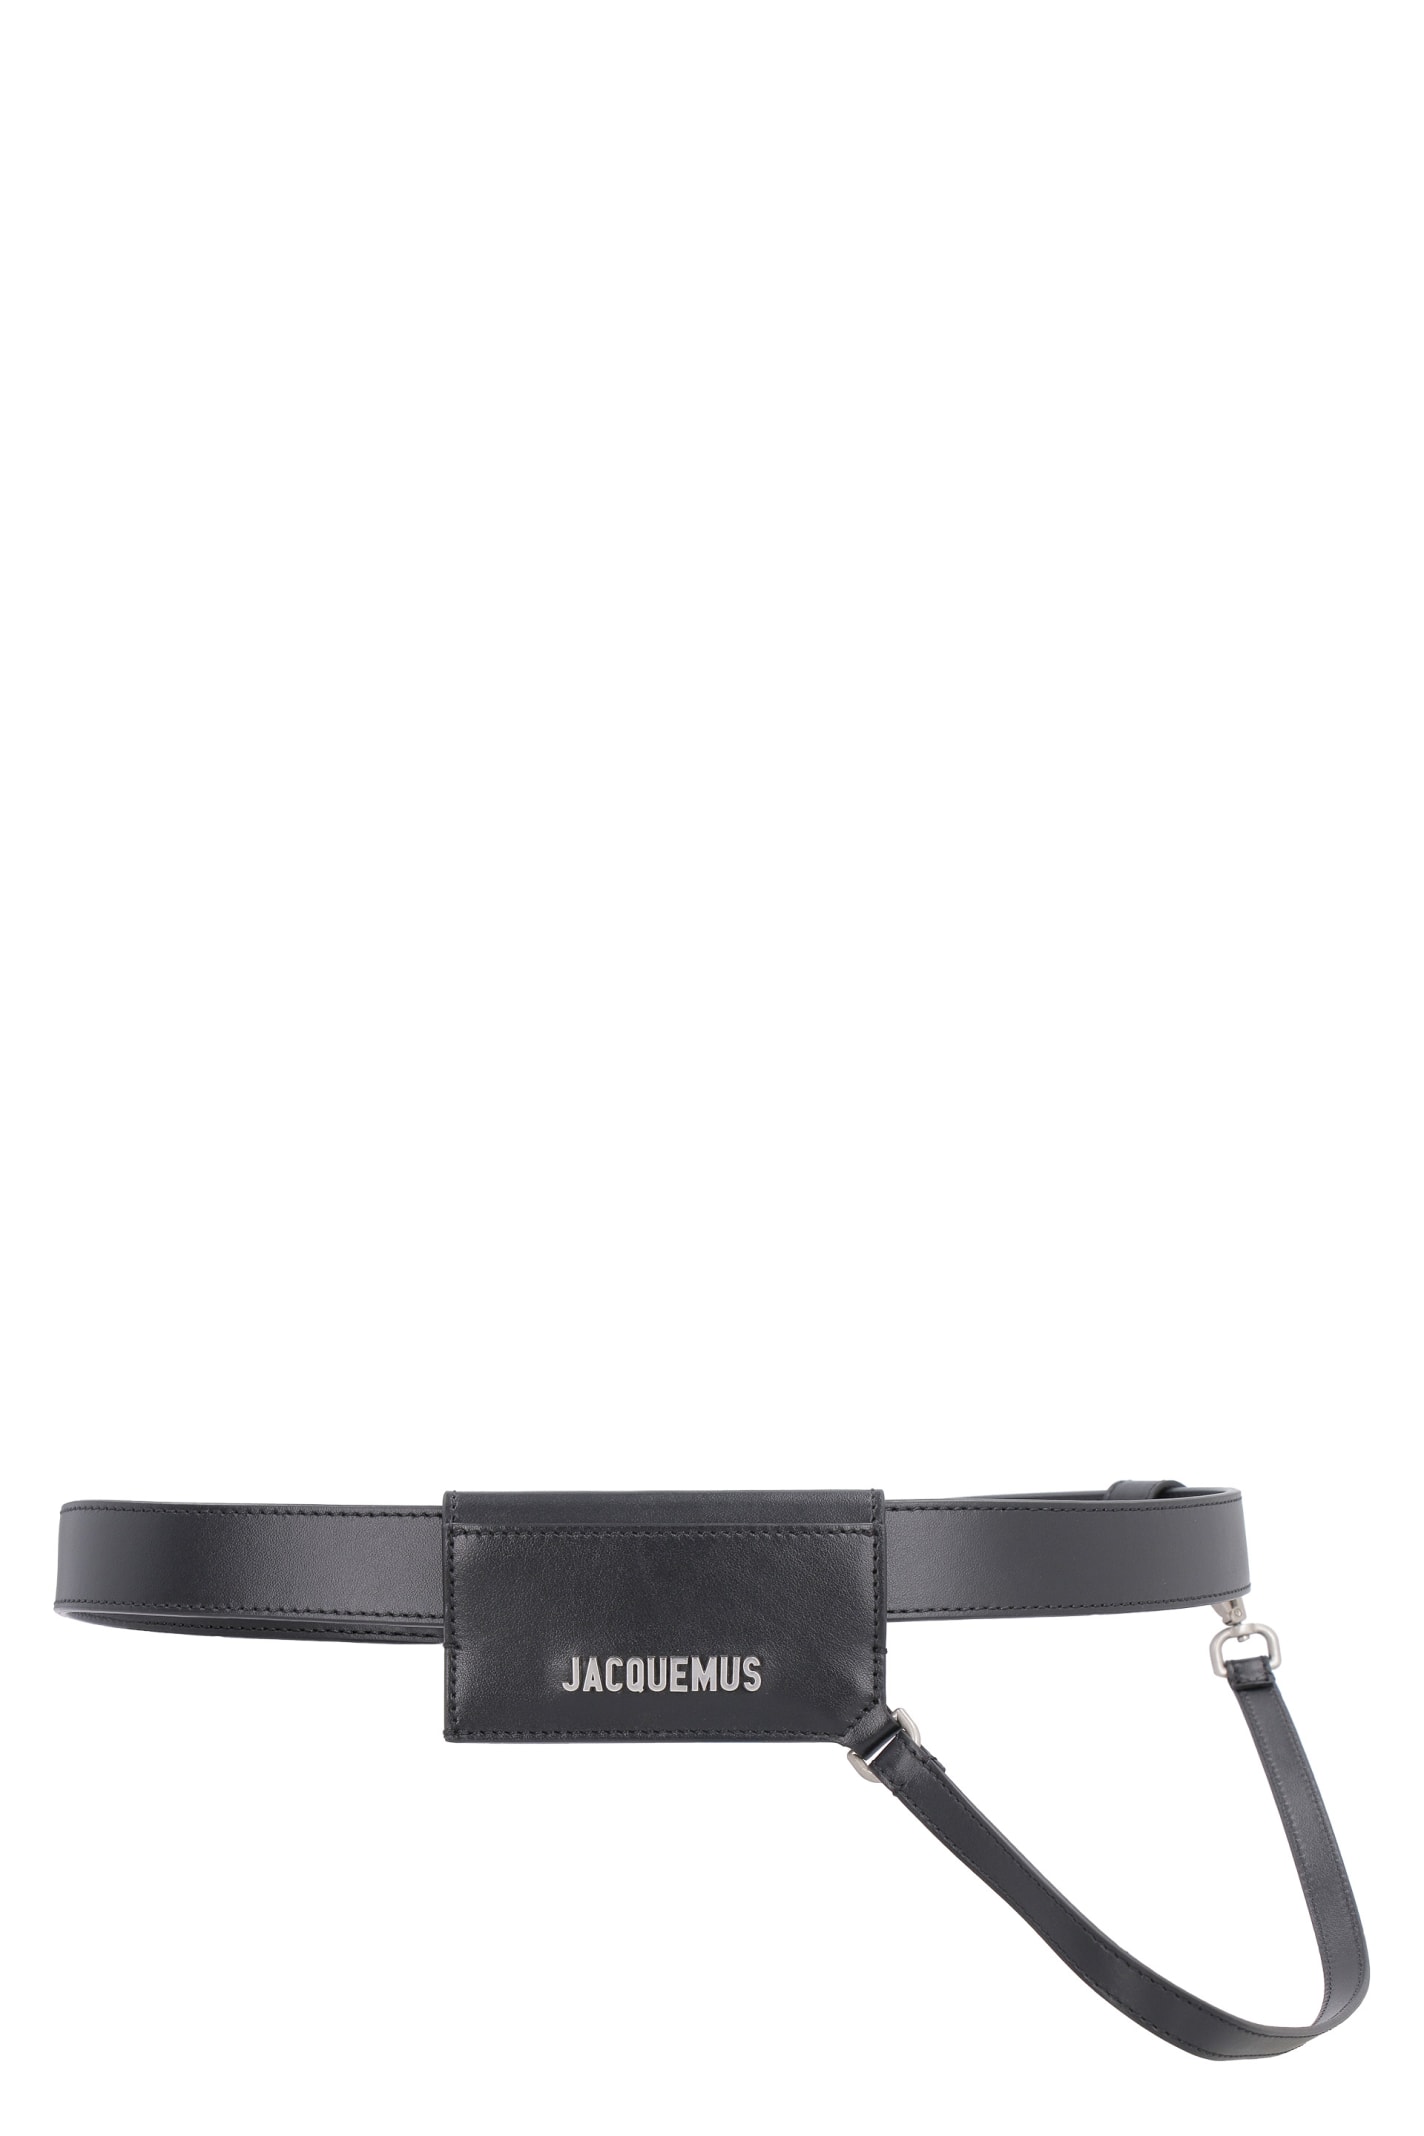 Jacquemus Smooth Leather Belt With Buckle